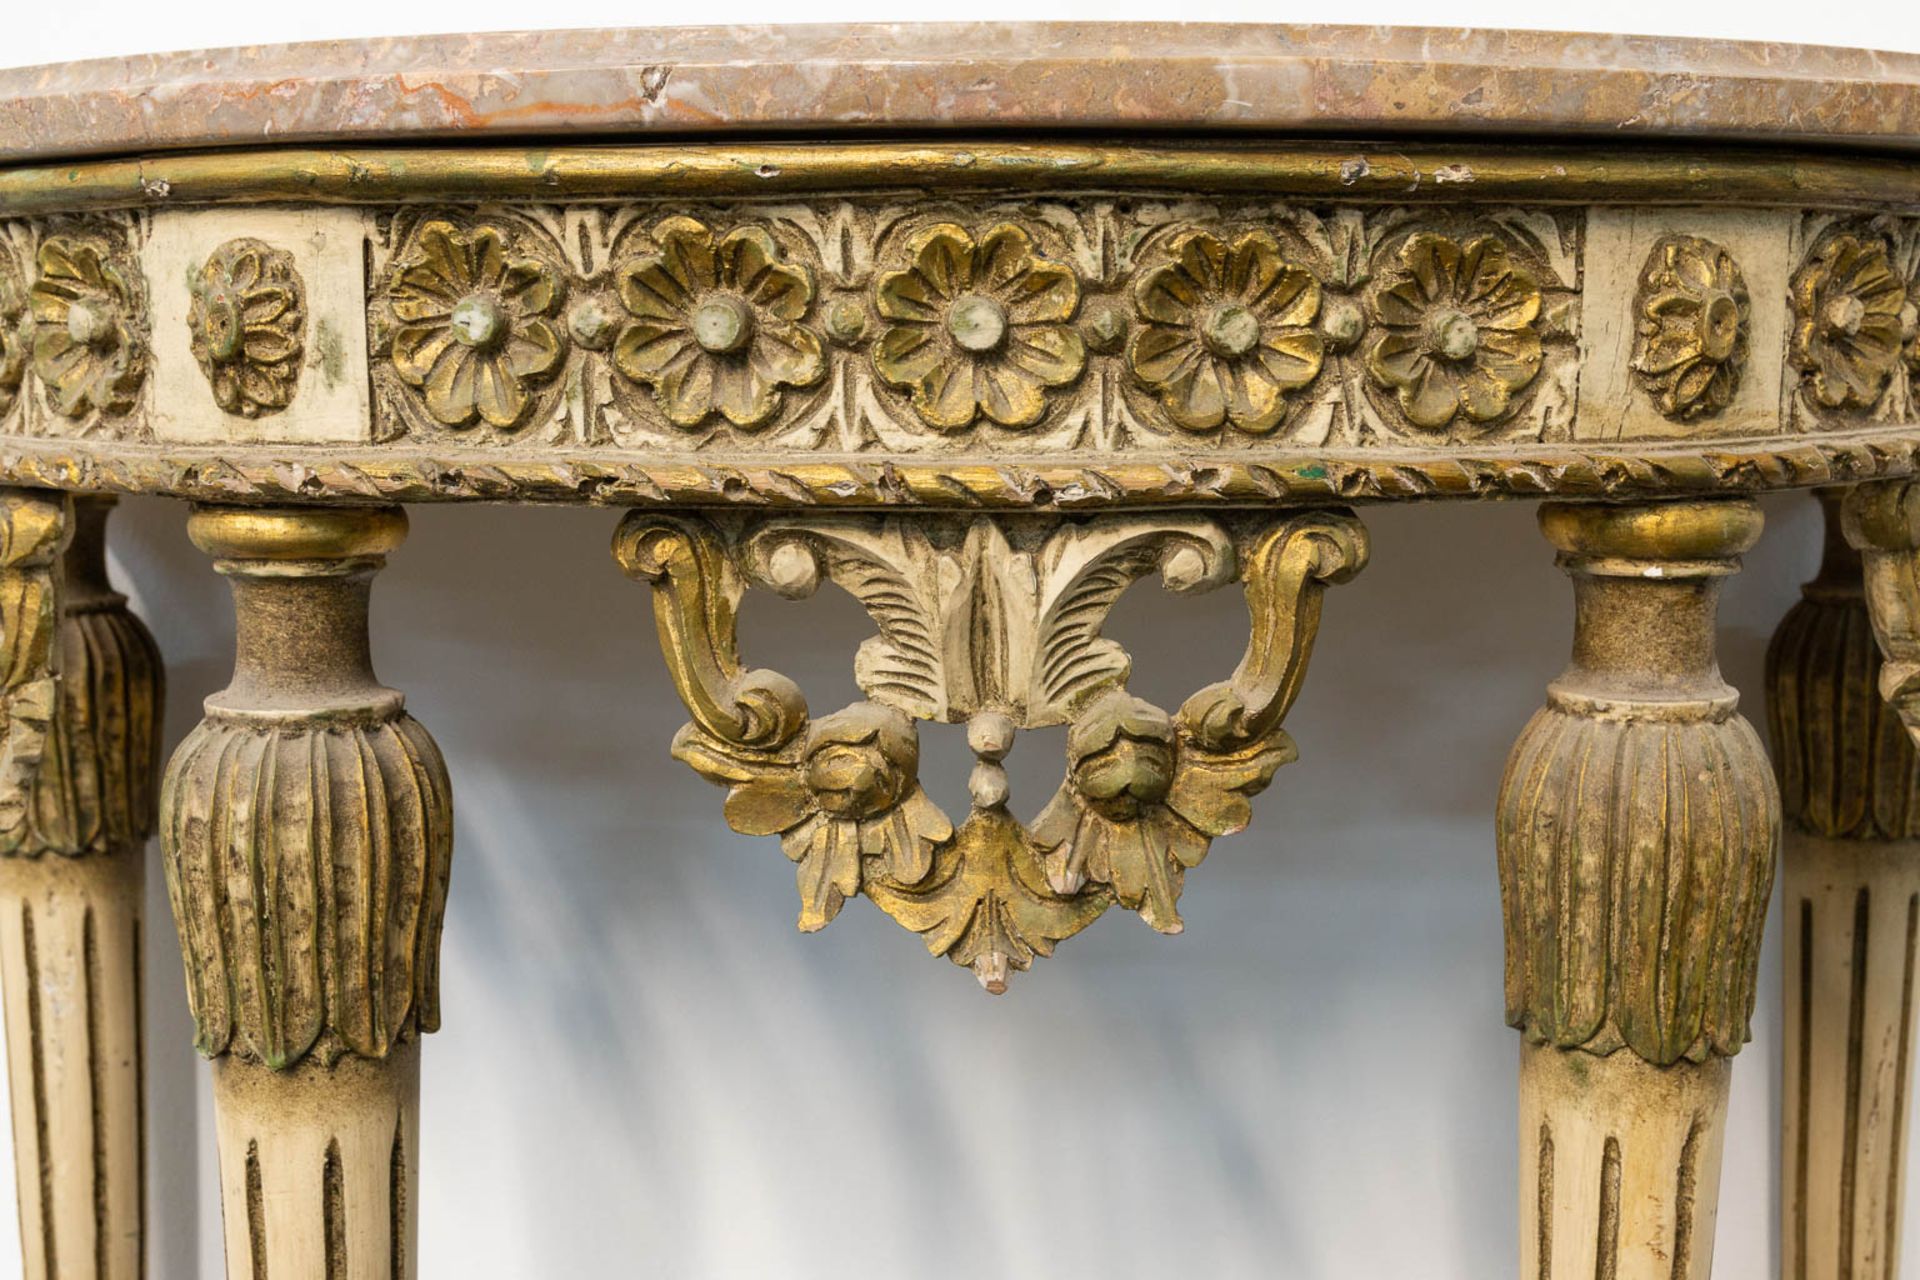 A Louis XVI style console table with marble top and sculptured wood decorations. - Image 12 of 12